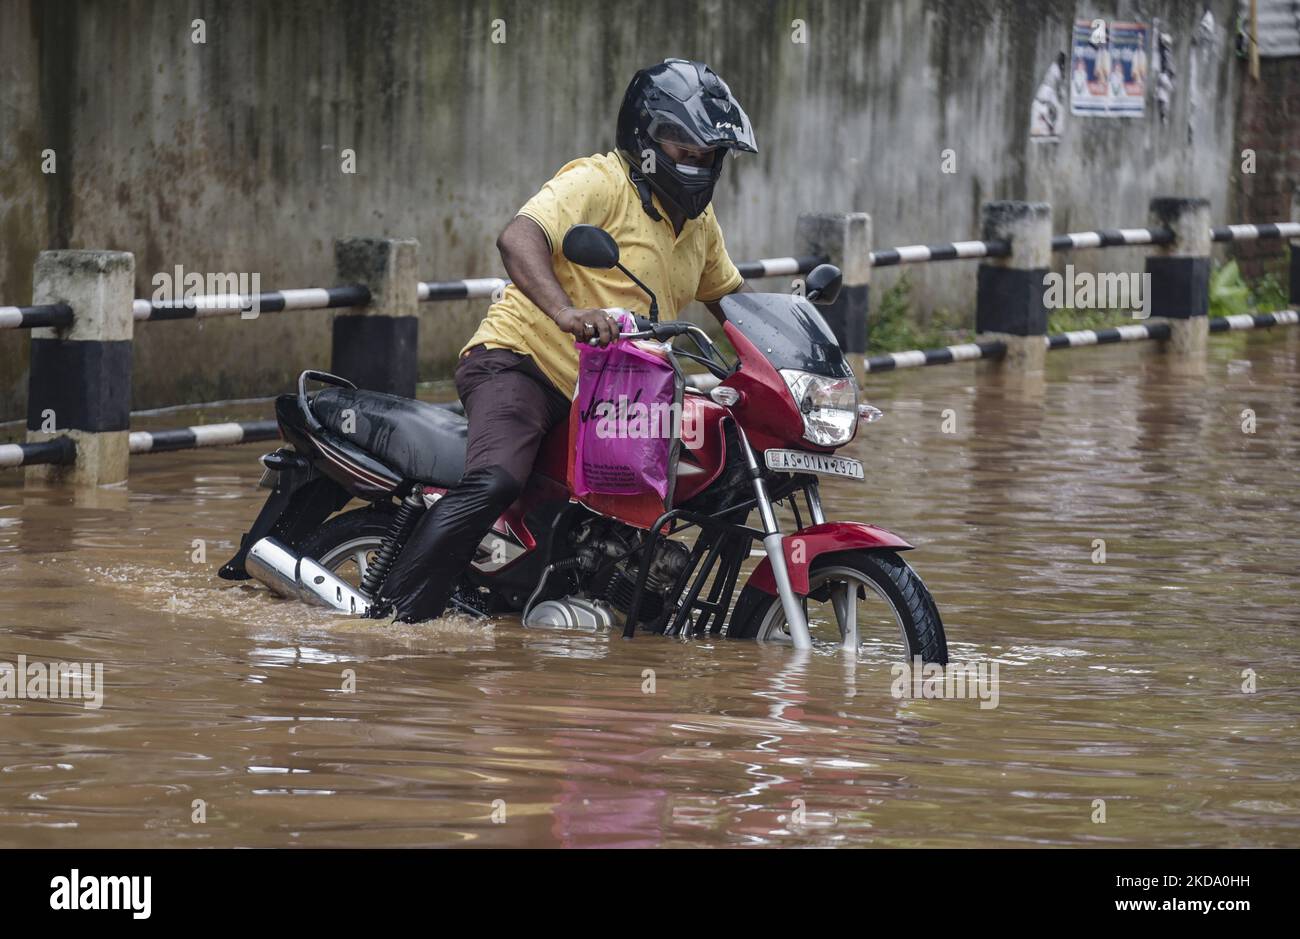 Commuters Make Their Way On A Waterlogged Street After A Heavy Rainfall In Guwahati Assam